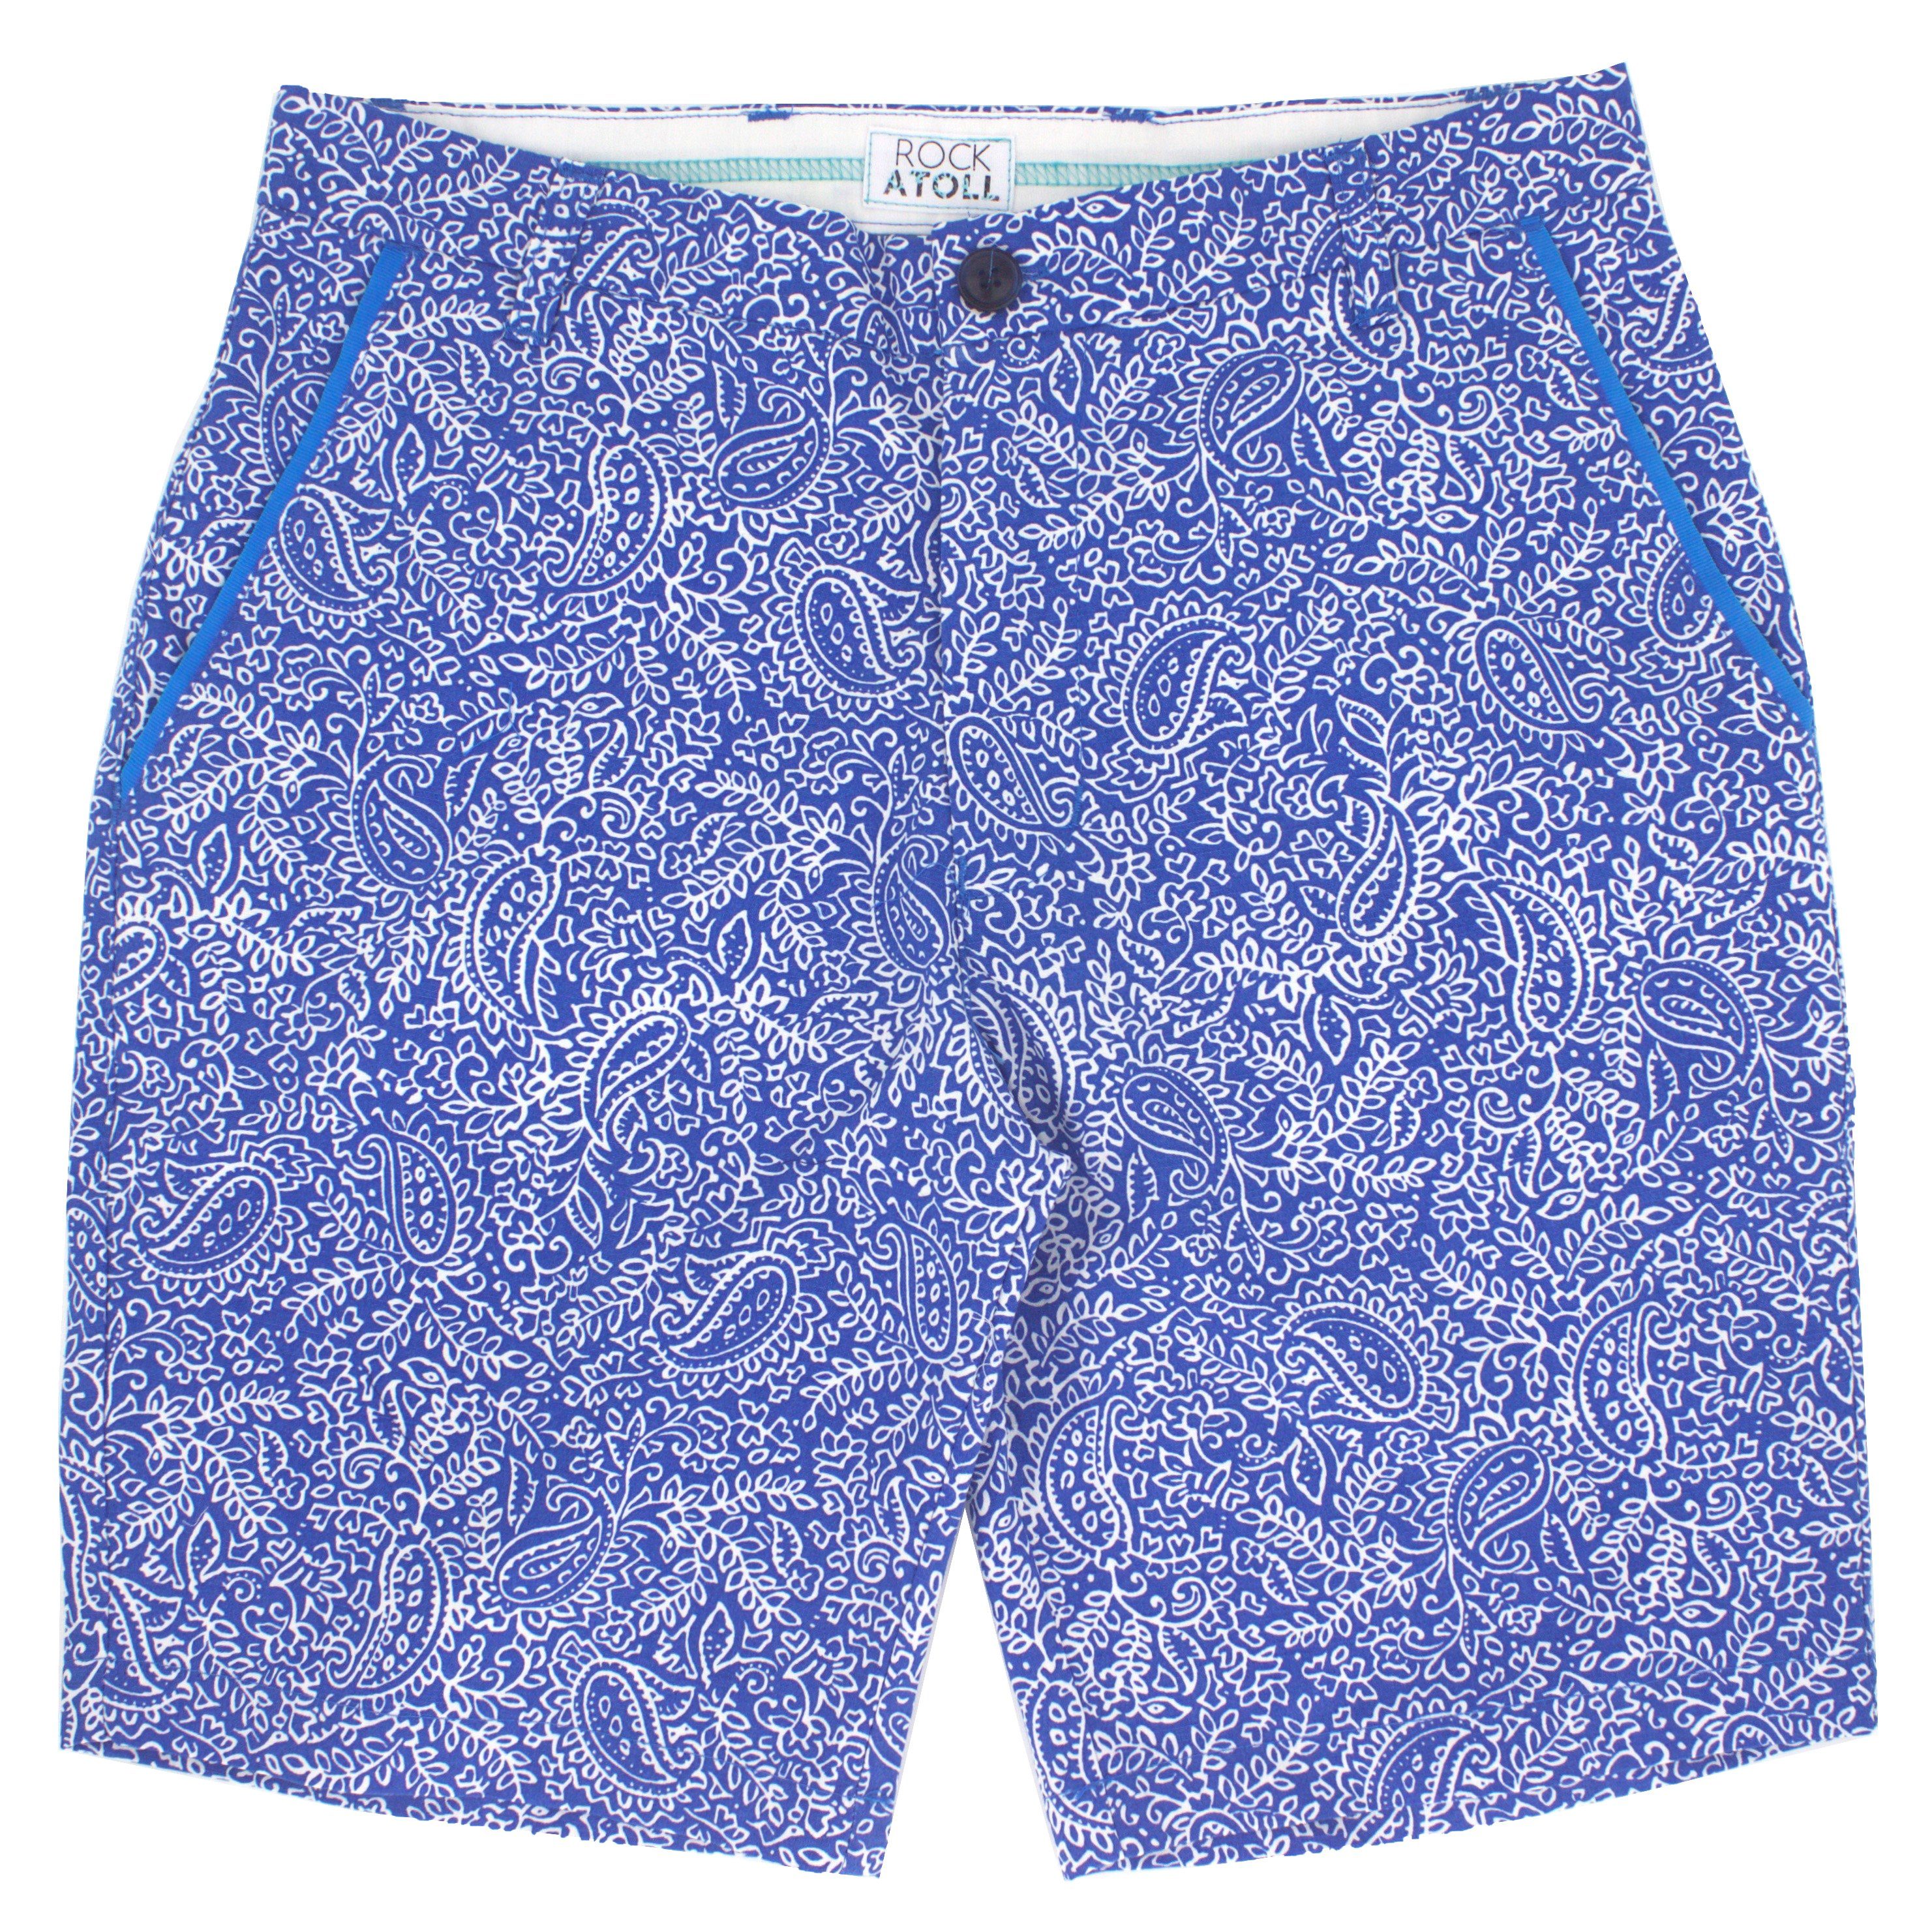 Bright Blue Paisley Print Flat Front Chinos for Men